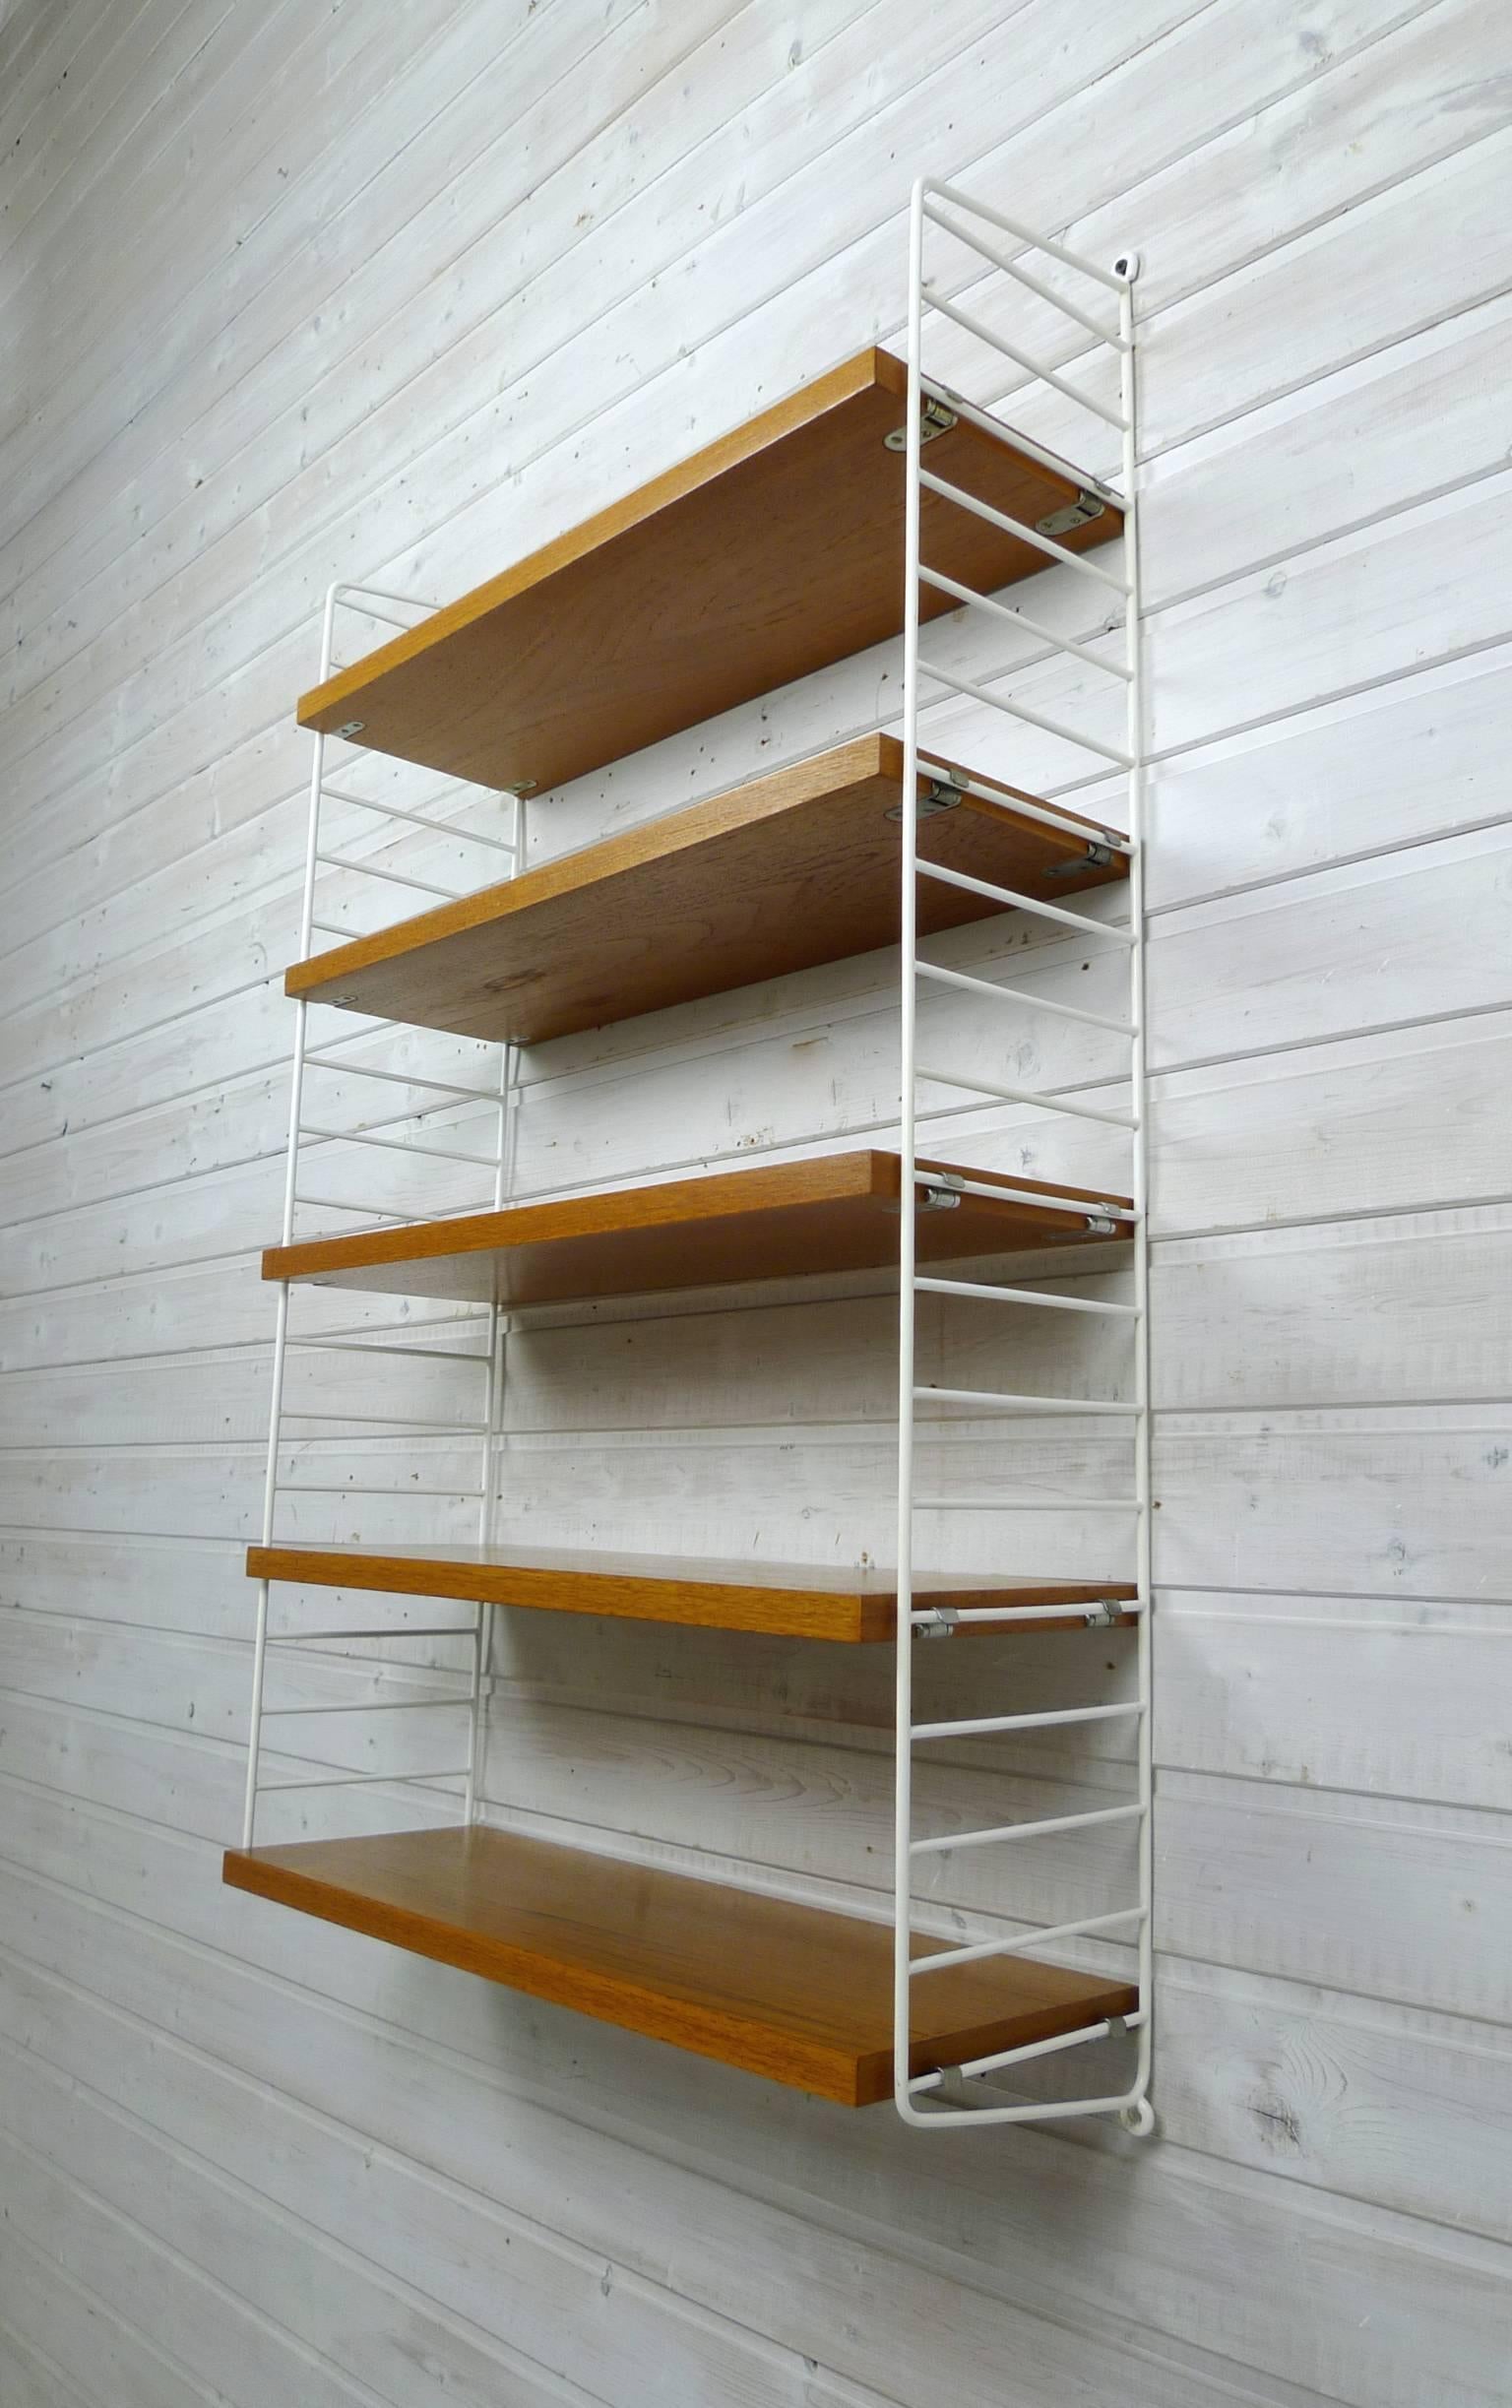 20th Century Teak Wall Shelving System by Nisse Strinning for String Design Ab, Sweden, 1960s For Sale